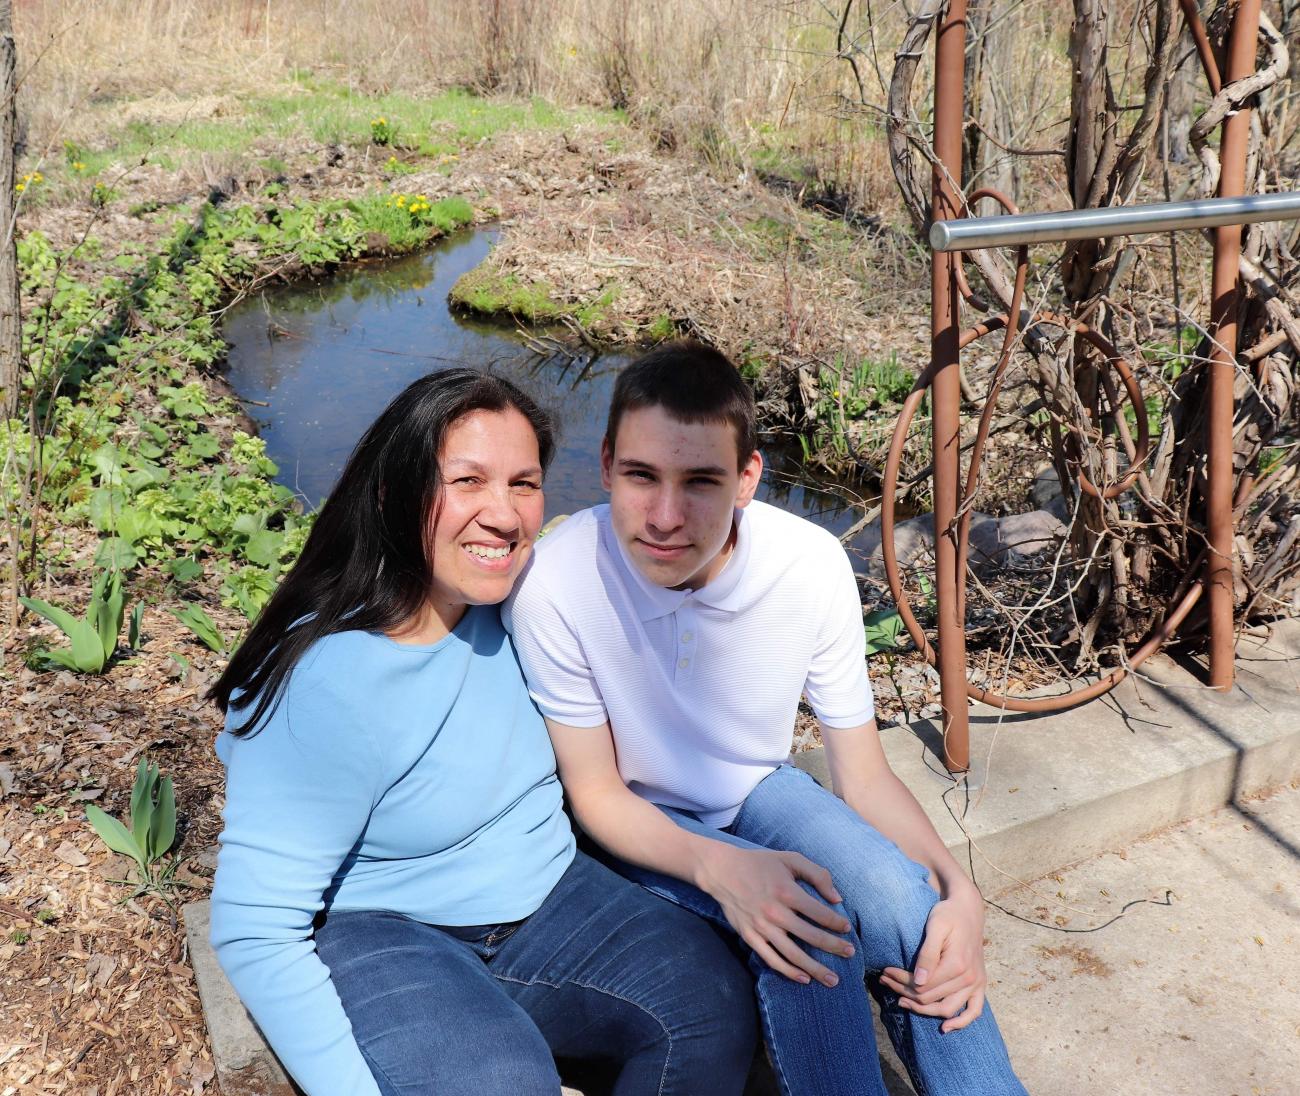 Margaret King and son Hudson Francour sitting by a creek, smiling